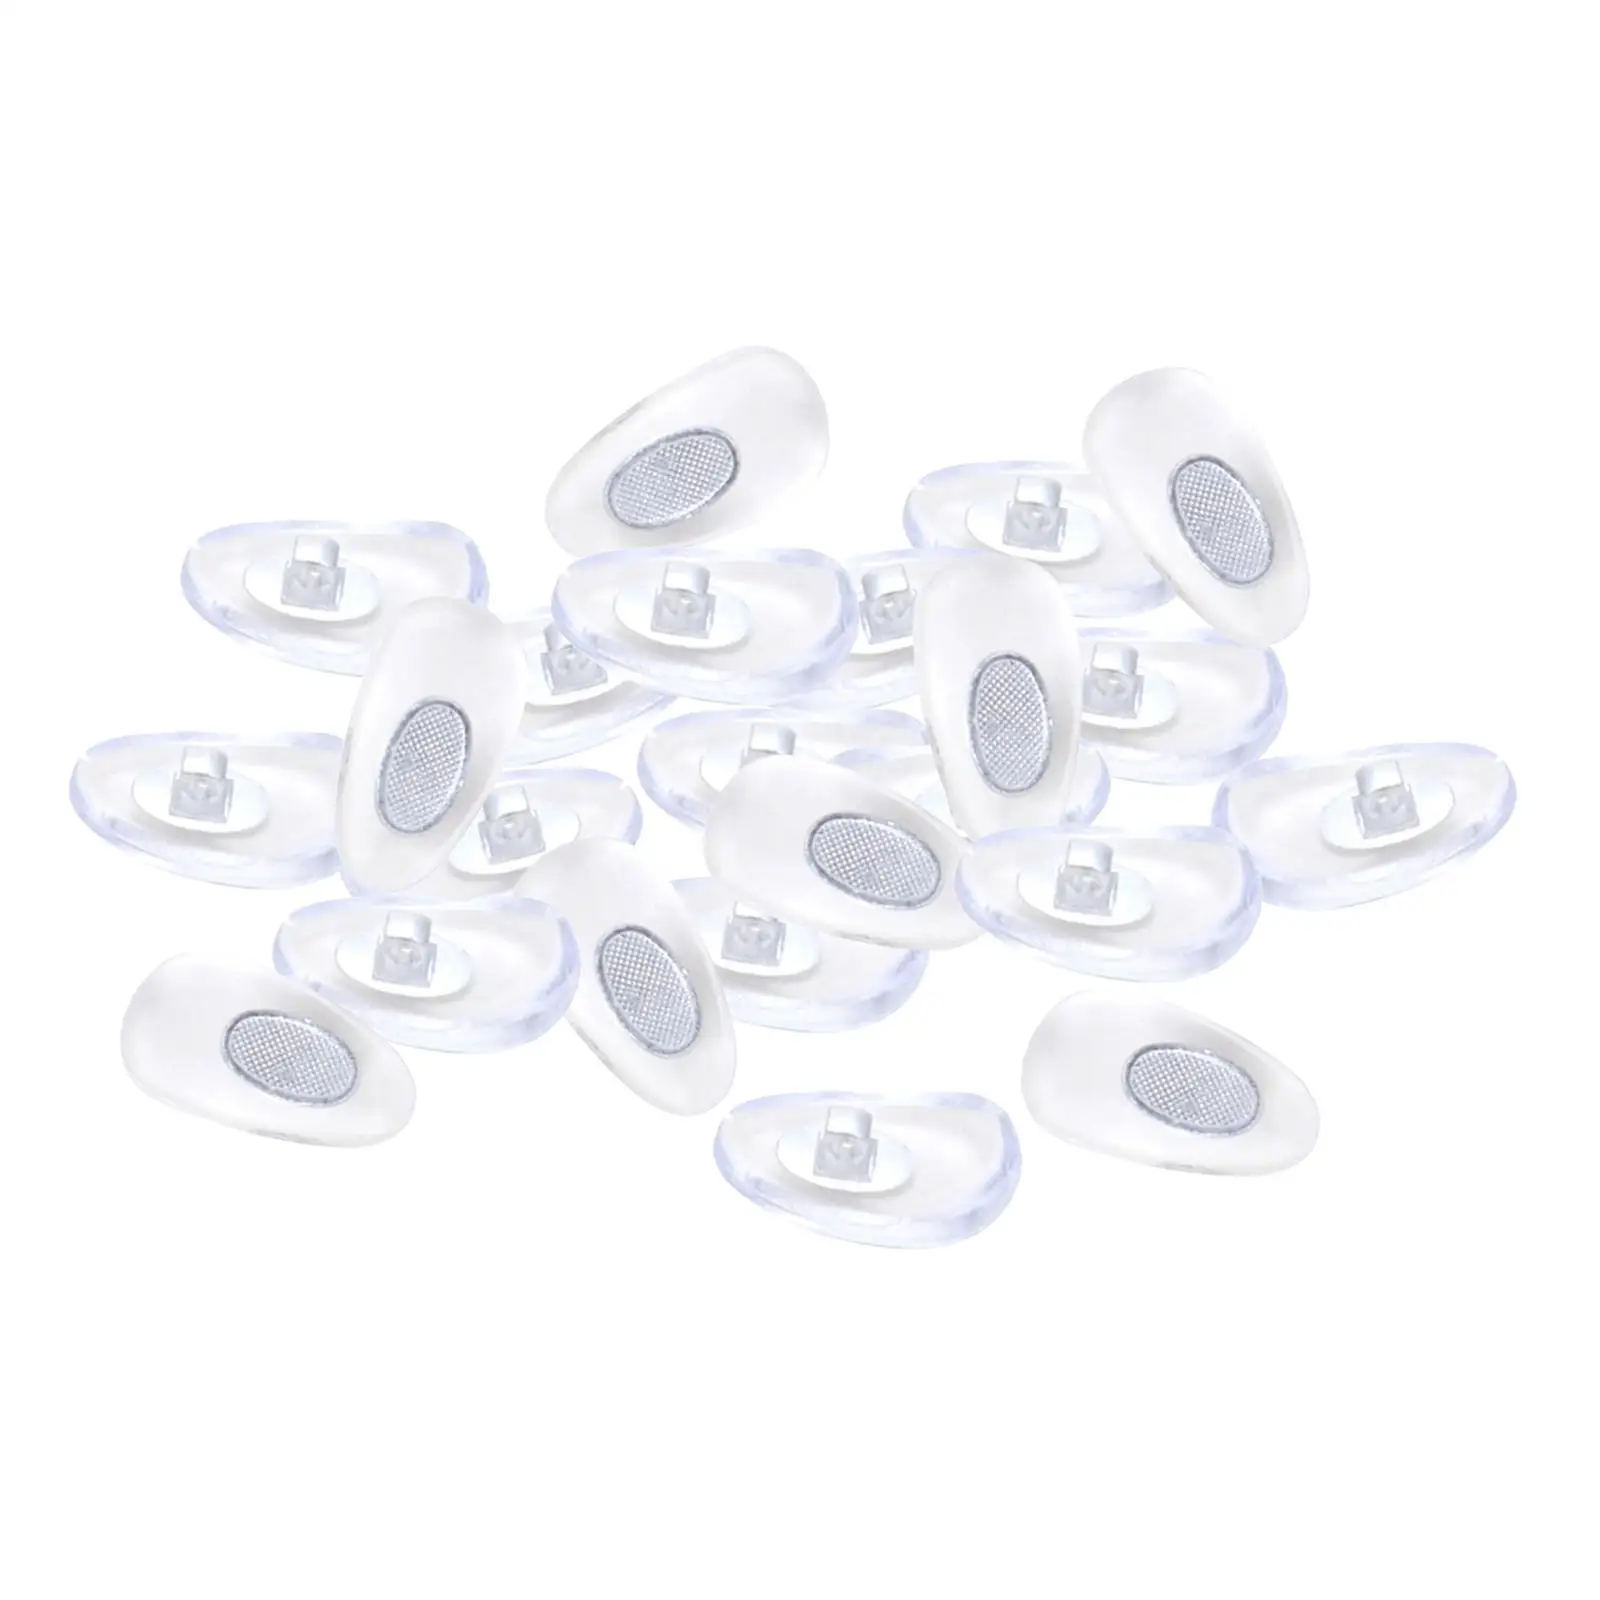 100Pcs Glasses Nose Pads with Metal Core Comfortable Nose Pieces Nose Bridge Pads Silicone Replacement for Eyeglasses Eyewear